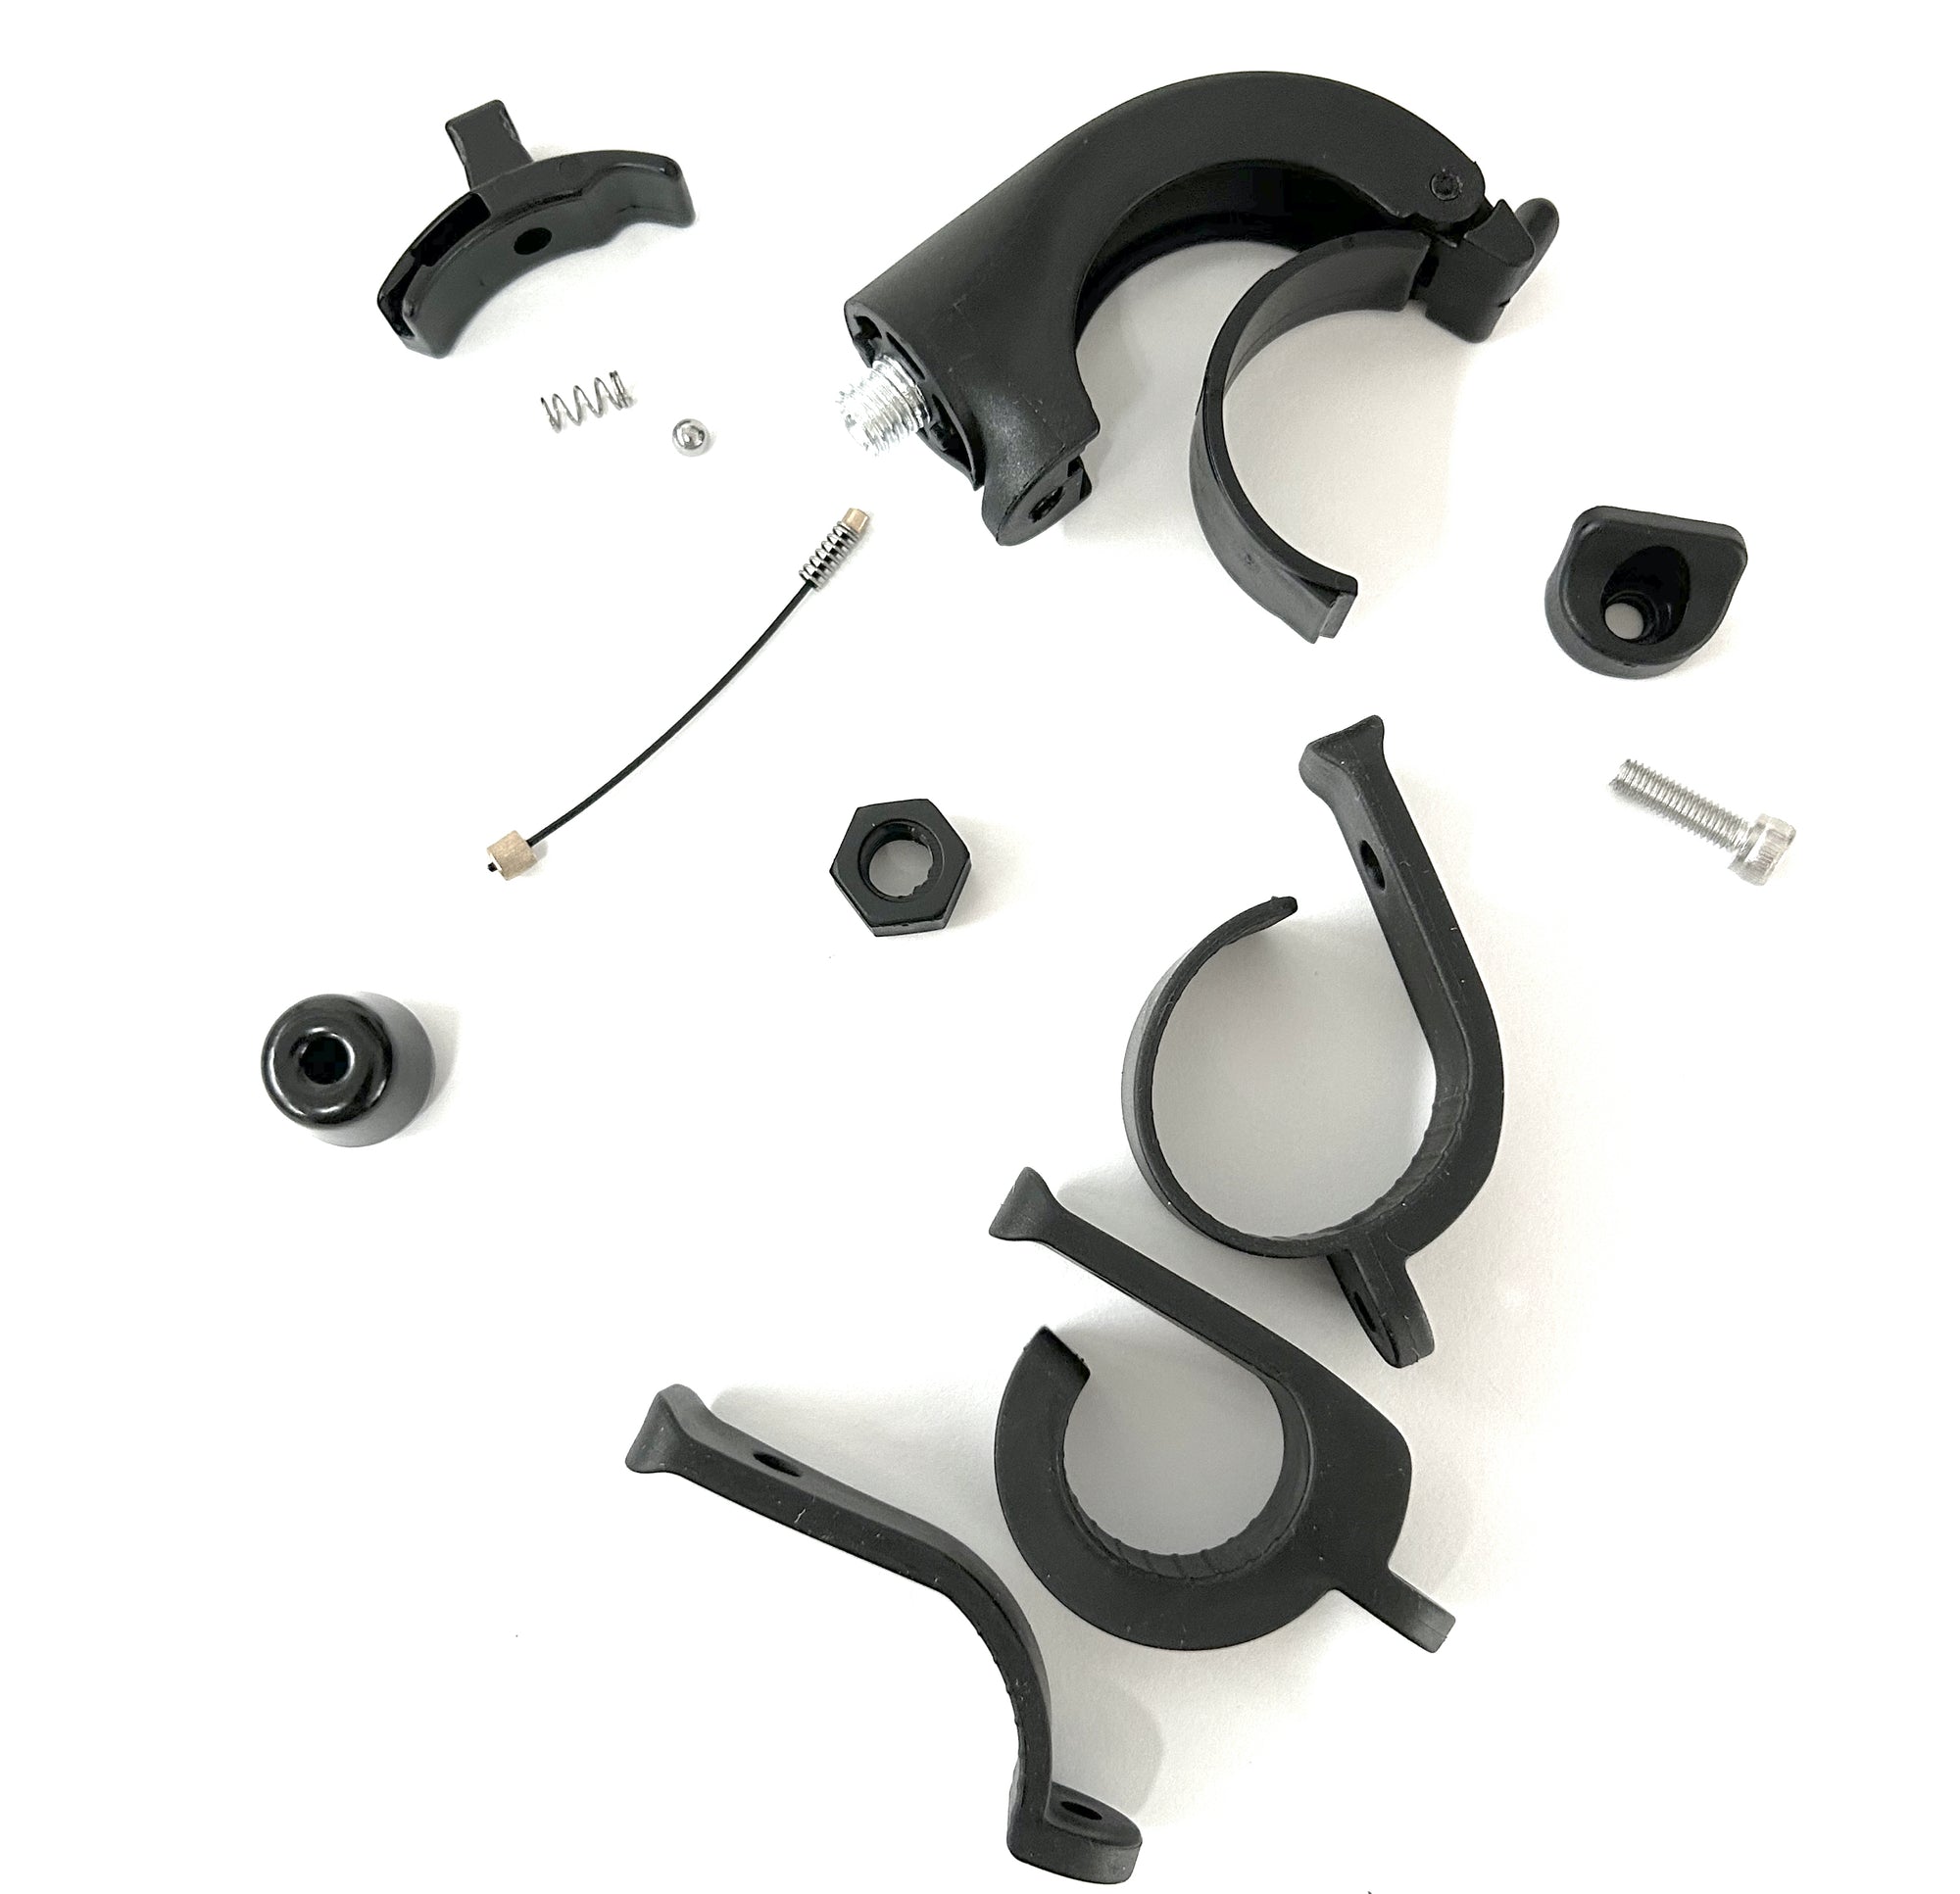 Full Set of Replacement Parts for Model Yew! - Quick Release